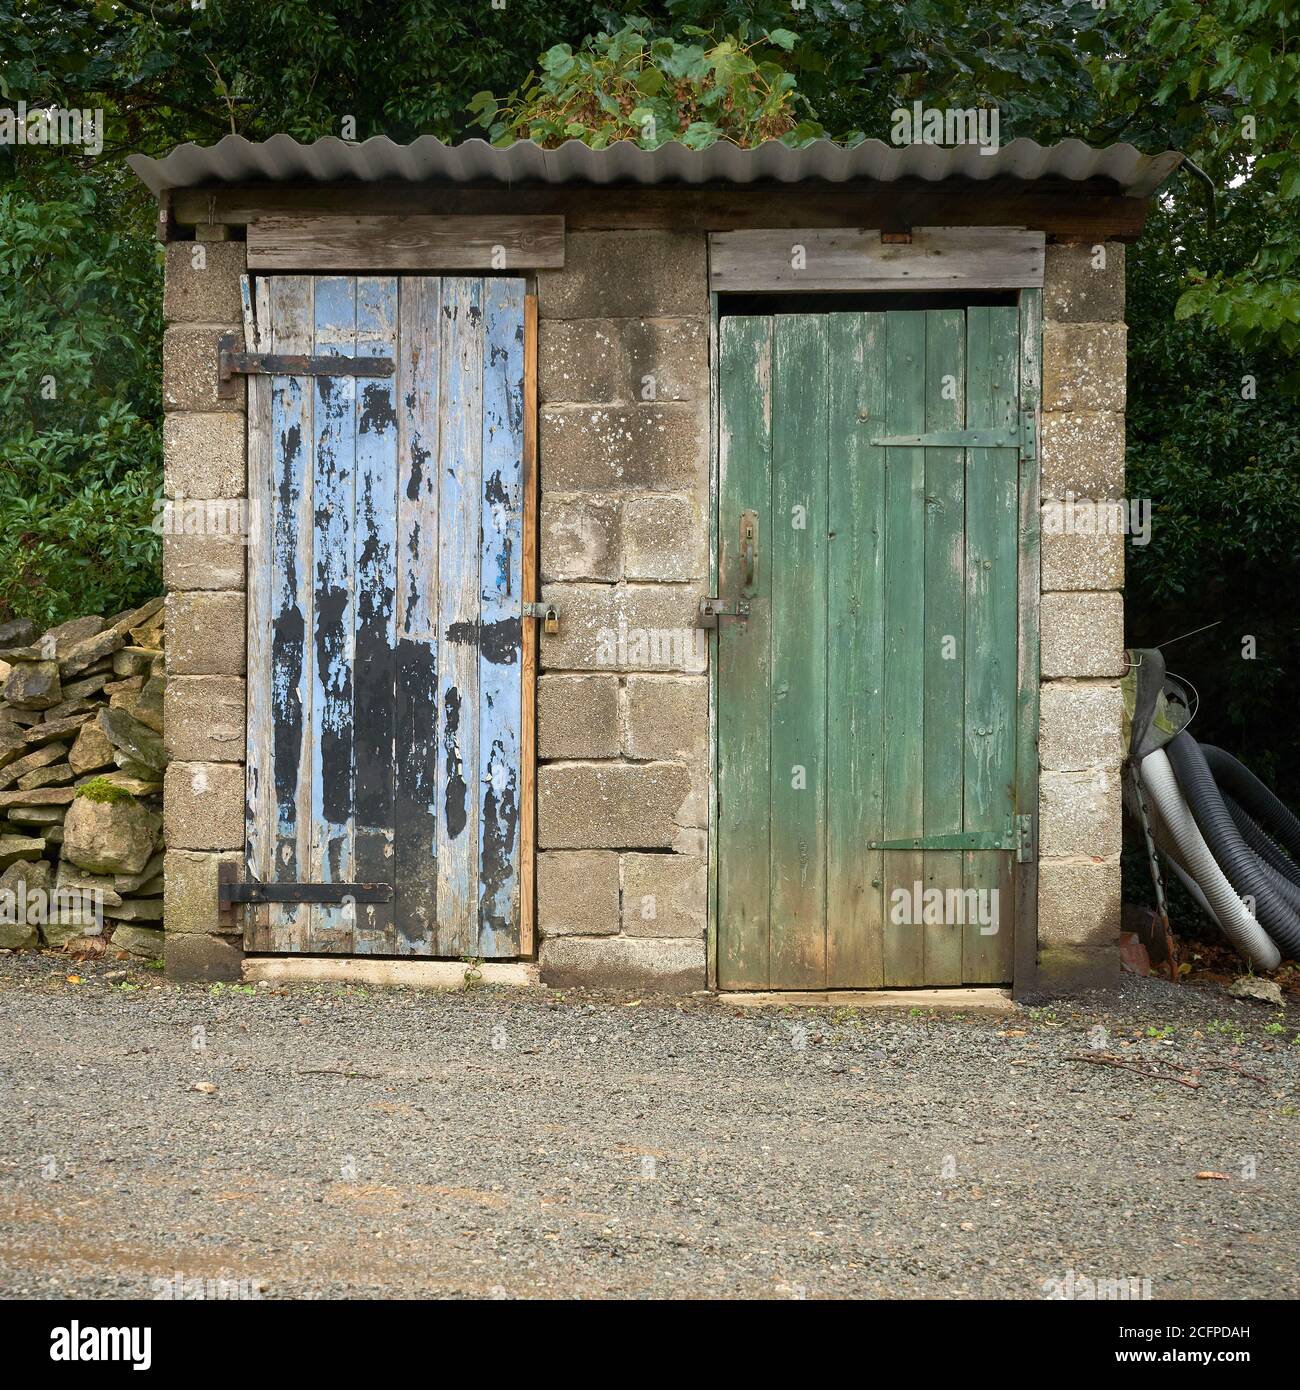 Breeze block shed with 2 weathered wooden doors one green and one blue and corrugated metal roof Stock Photo